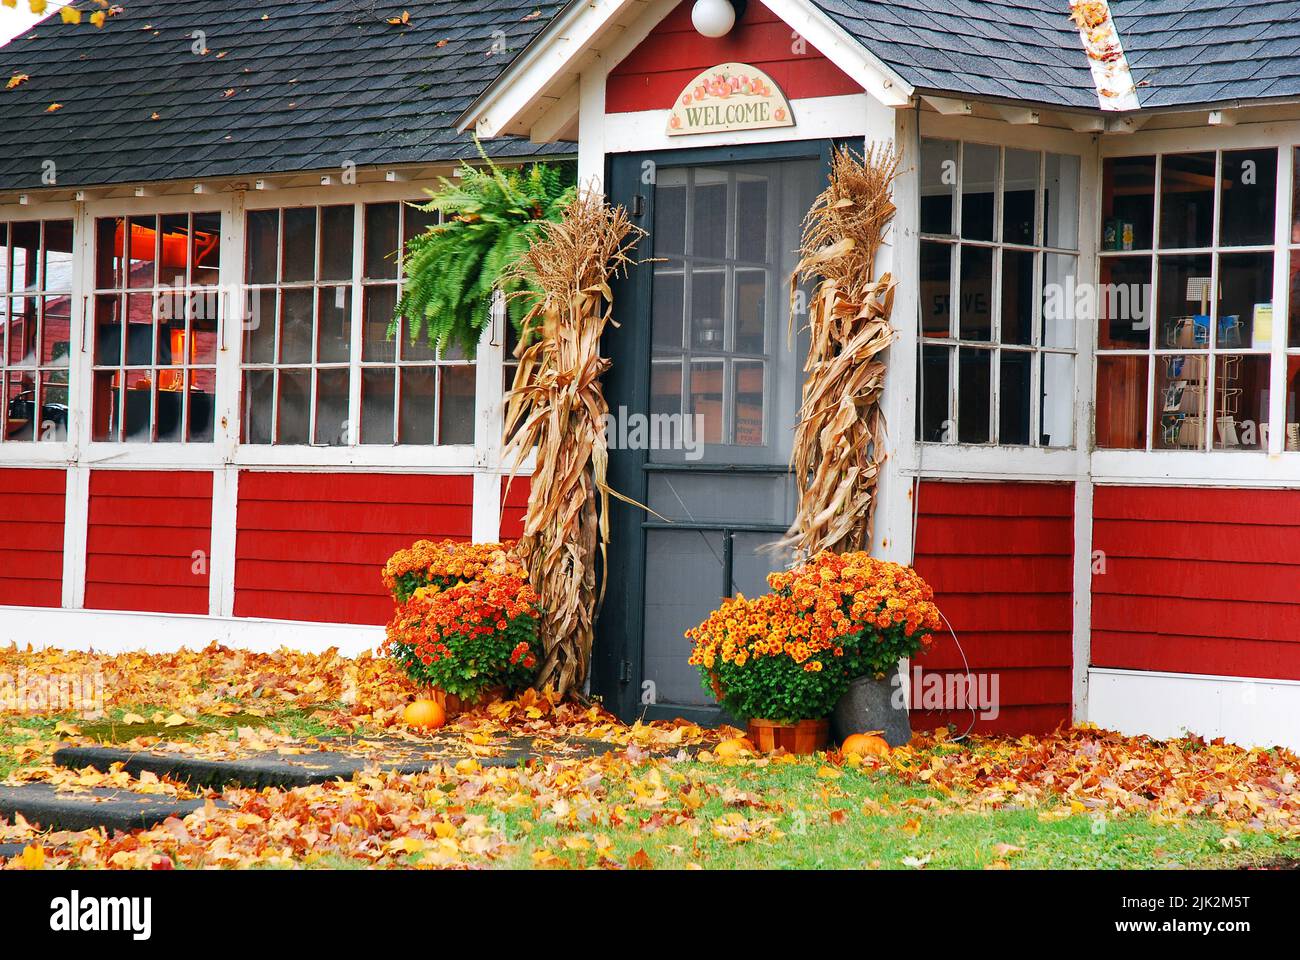 Fall decorations and fallen leaves are outside a cider mill and cafe in New England on an autumn day Stock Photo